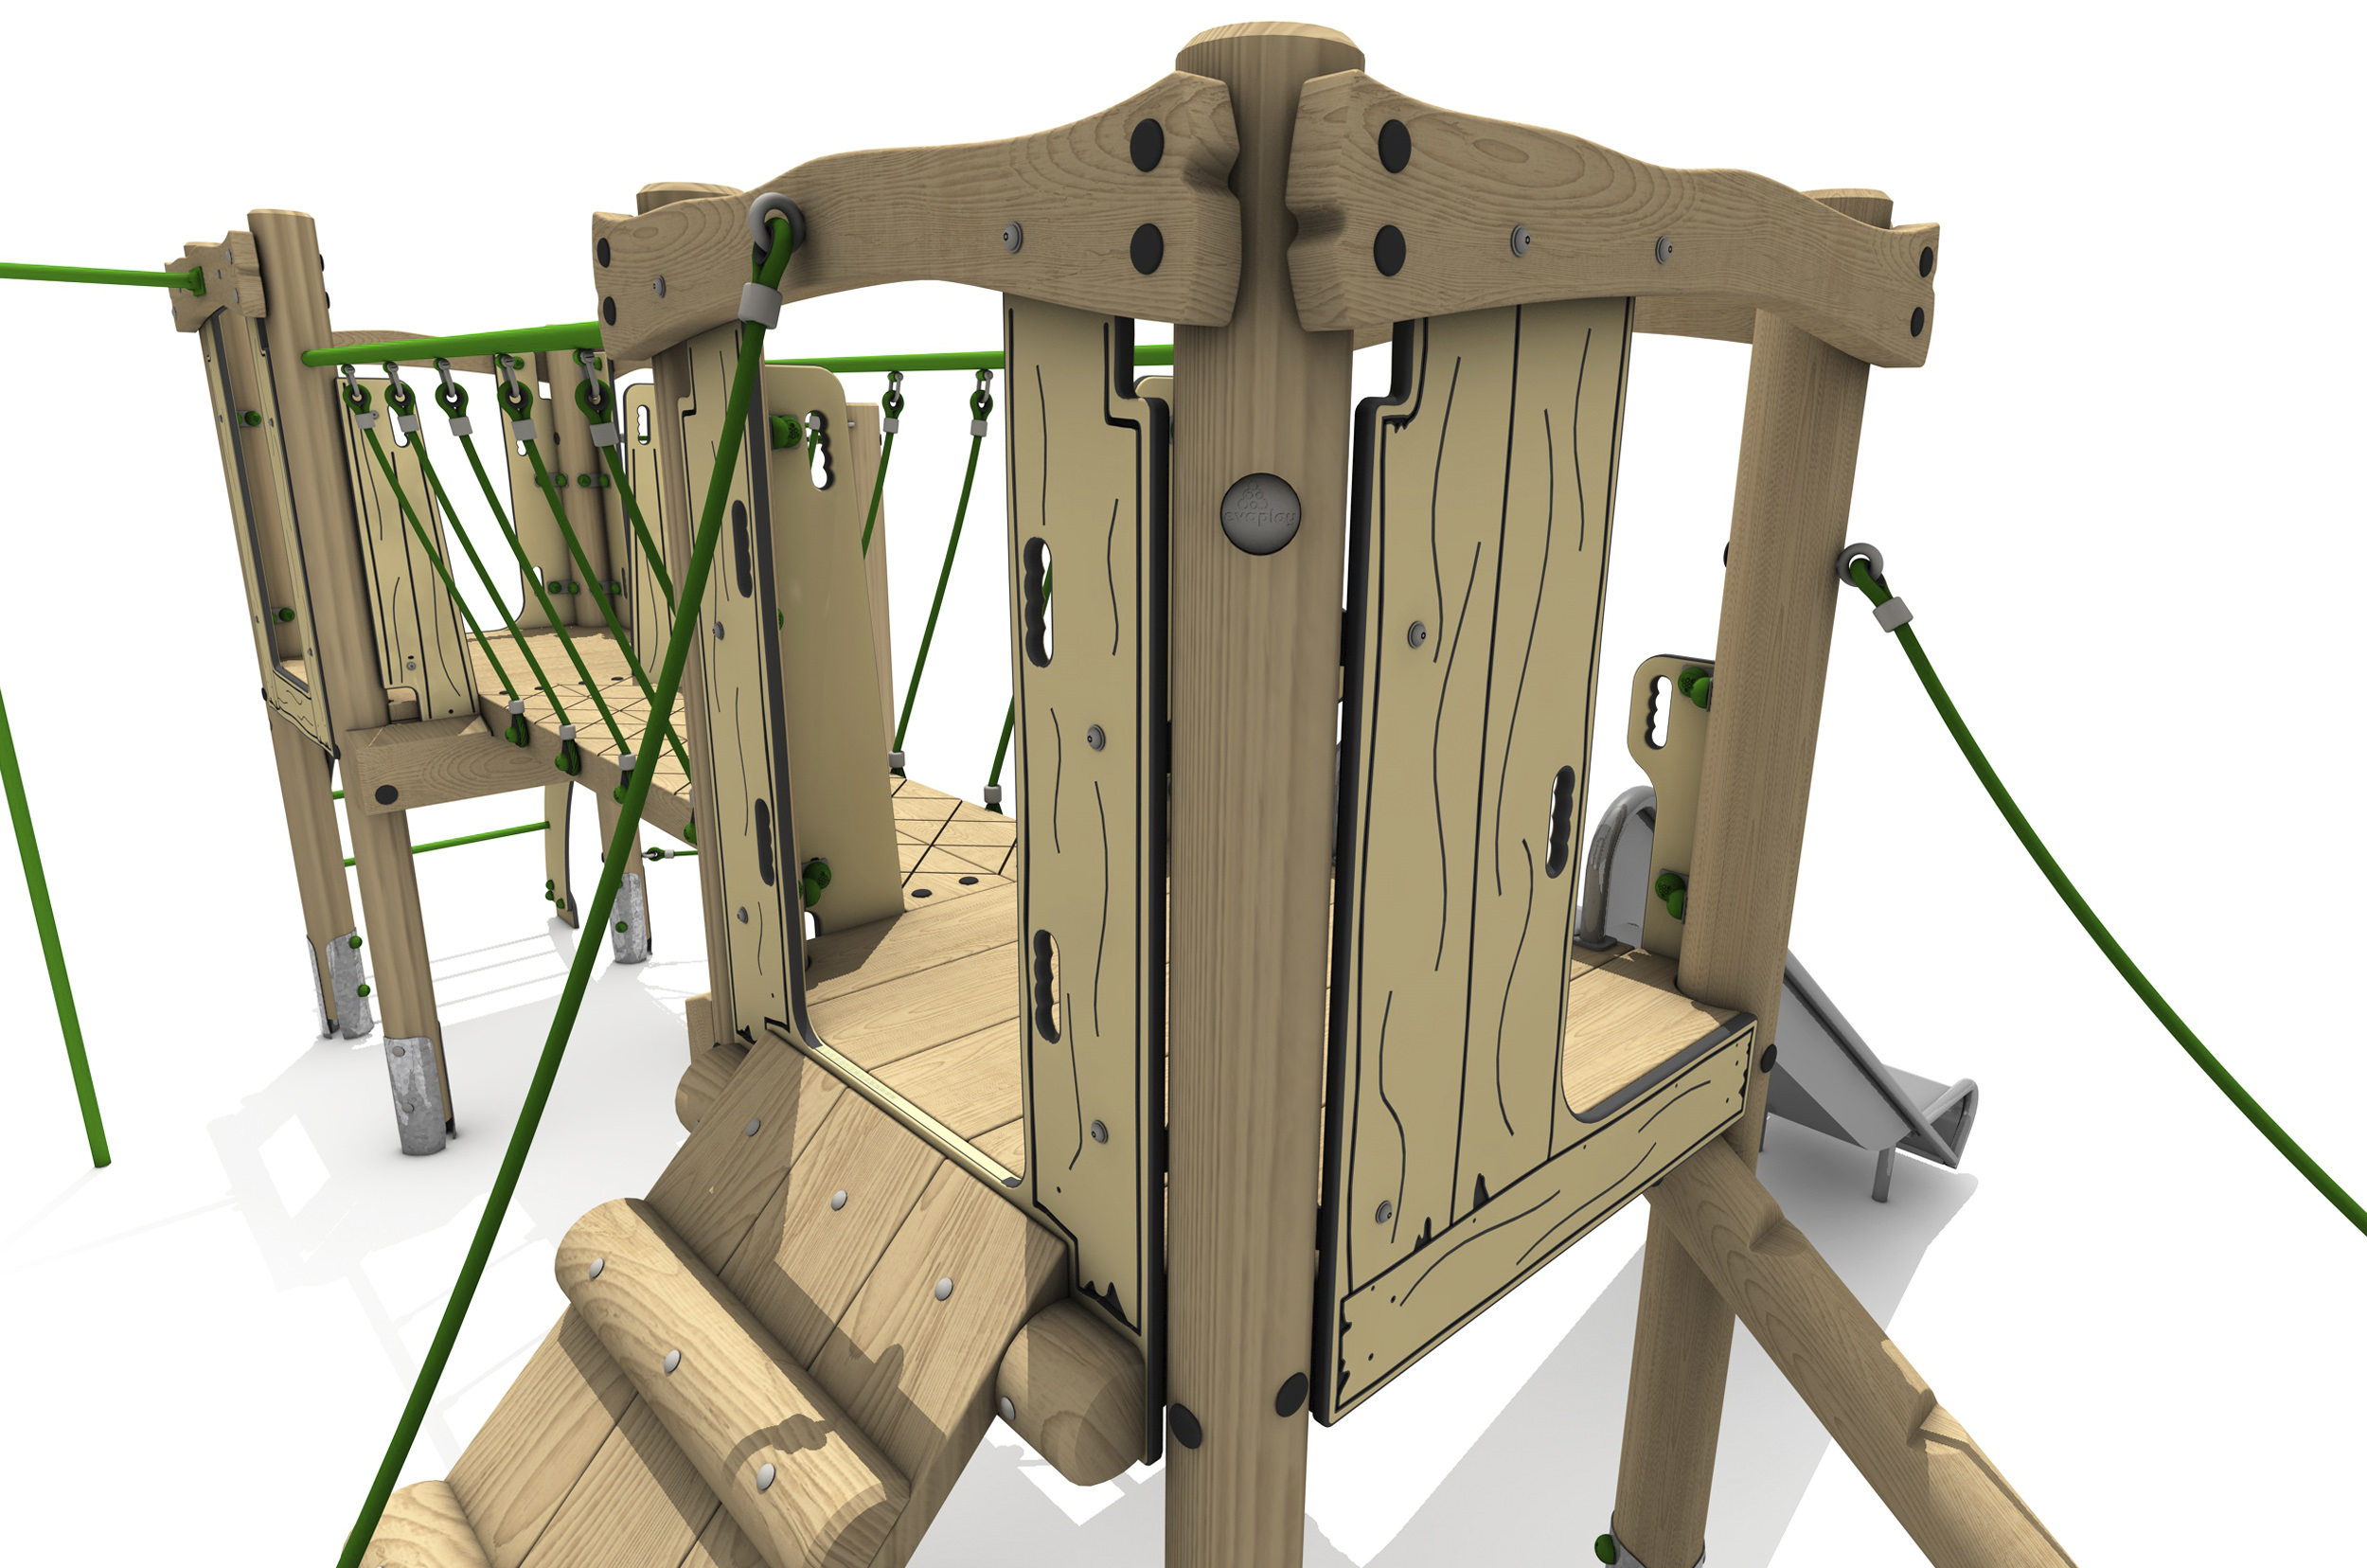 Timber Tower Double Deck 02, A timber tower climber platform accessed by a sloping ramps with green rope on the left and a sloping log with green rope on the right.